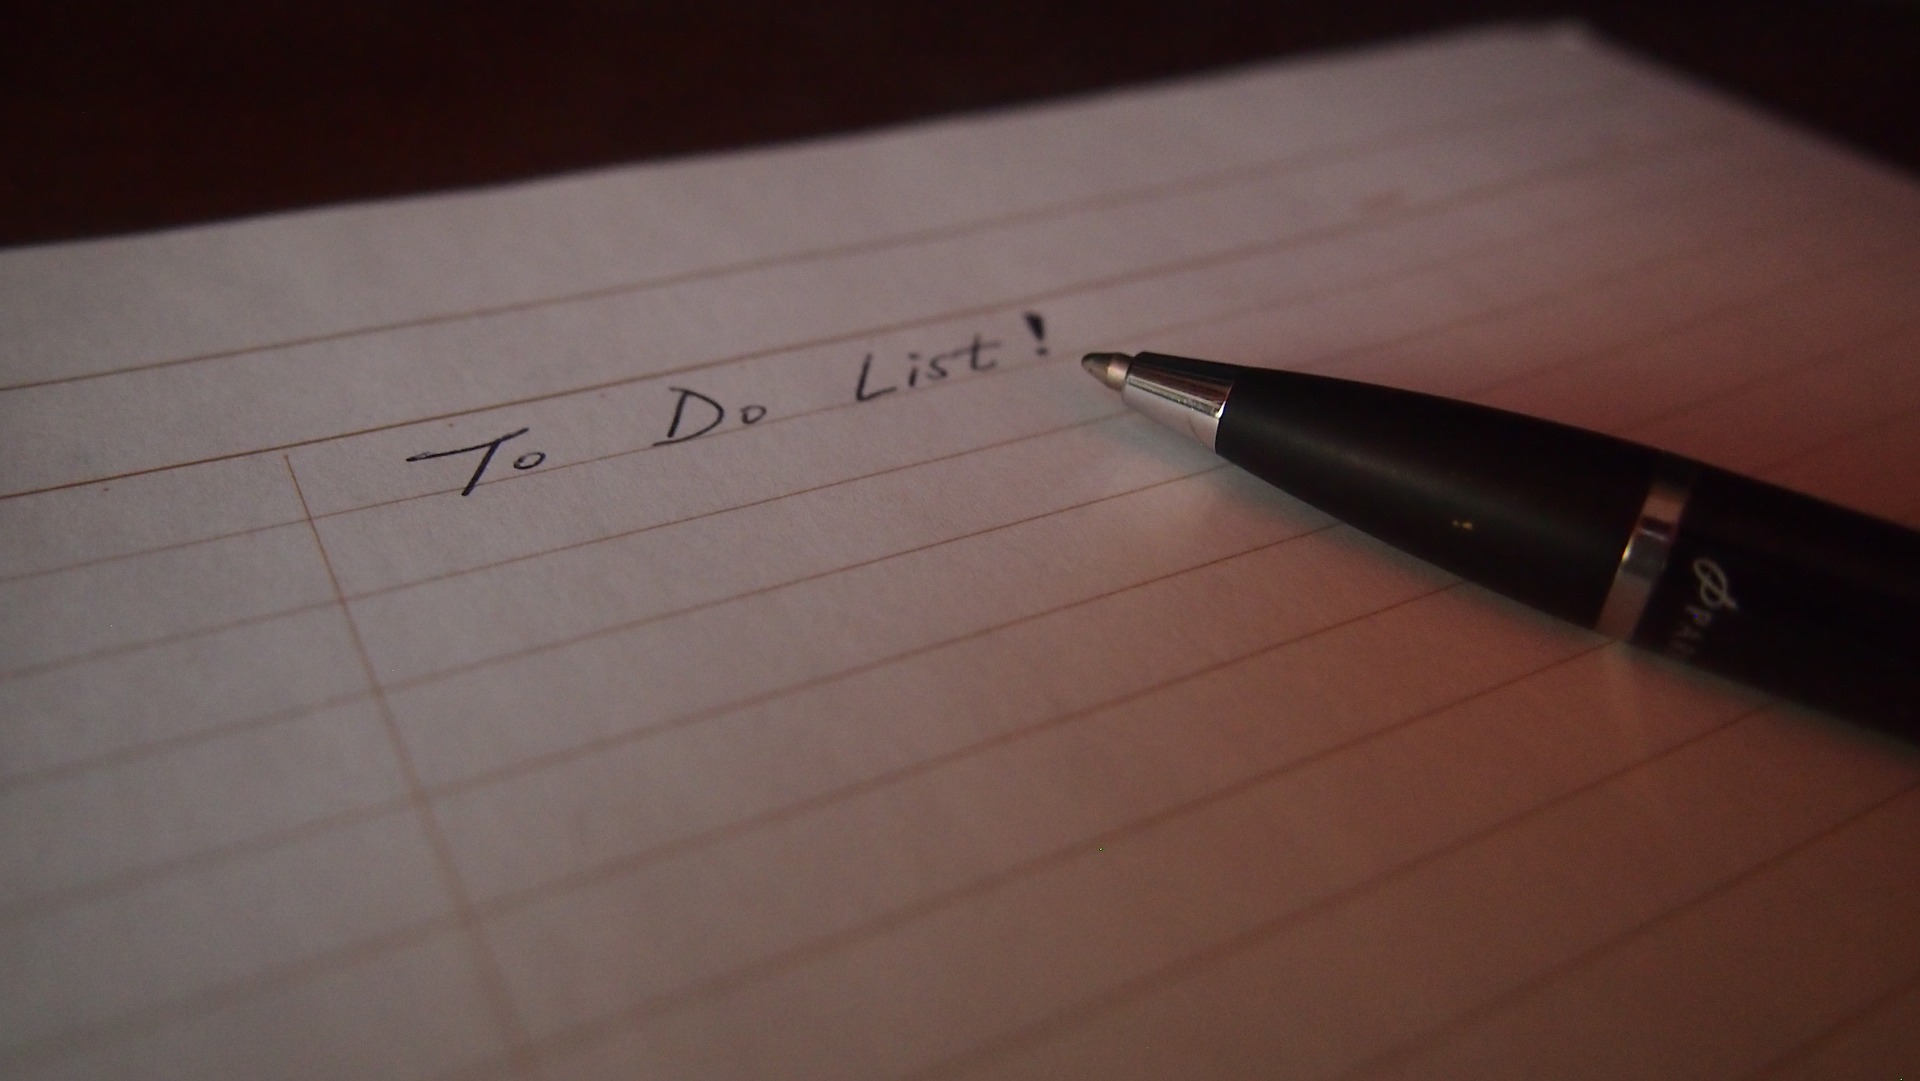 Long To-Do List